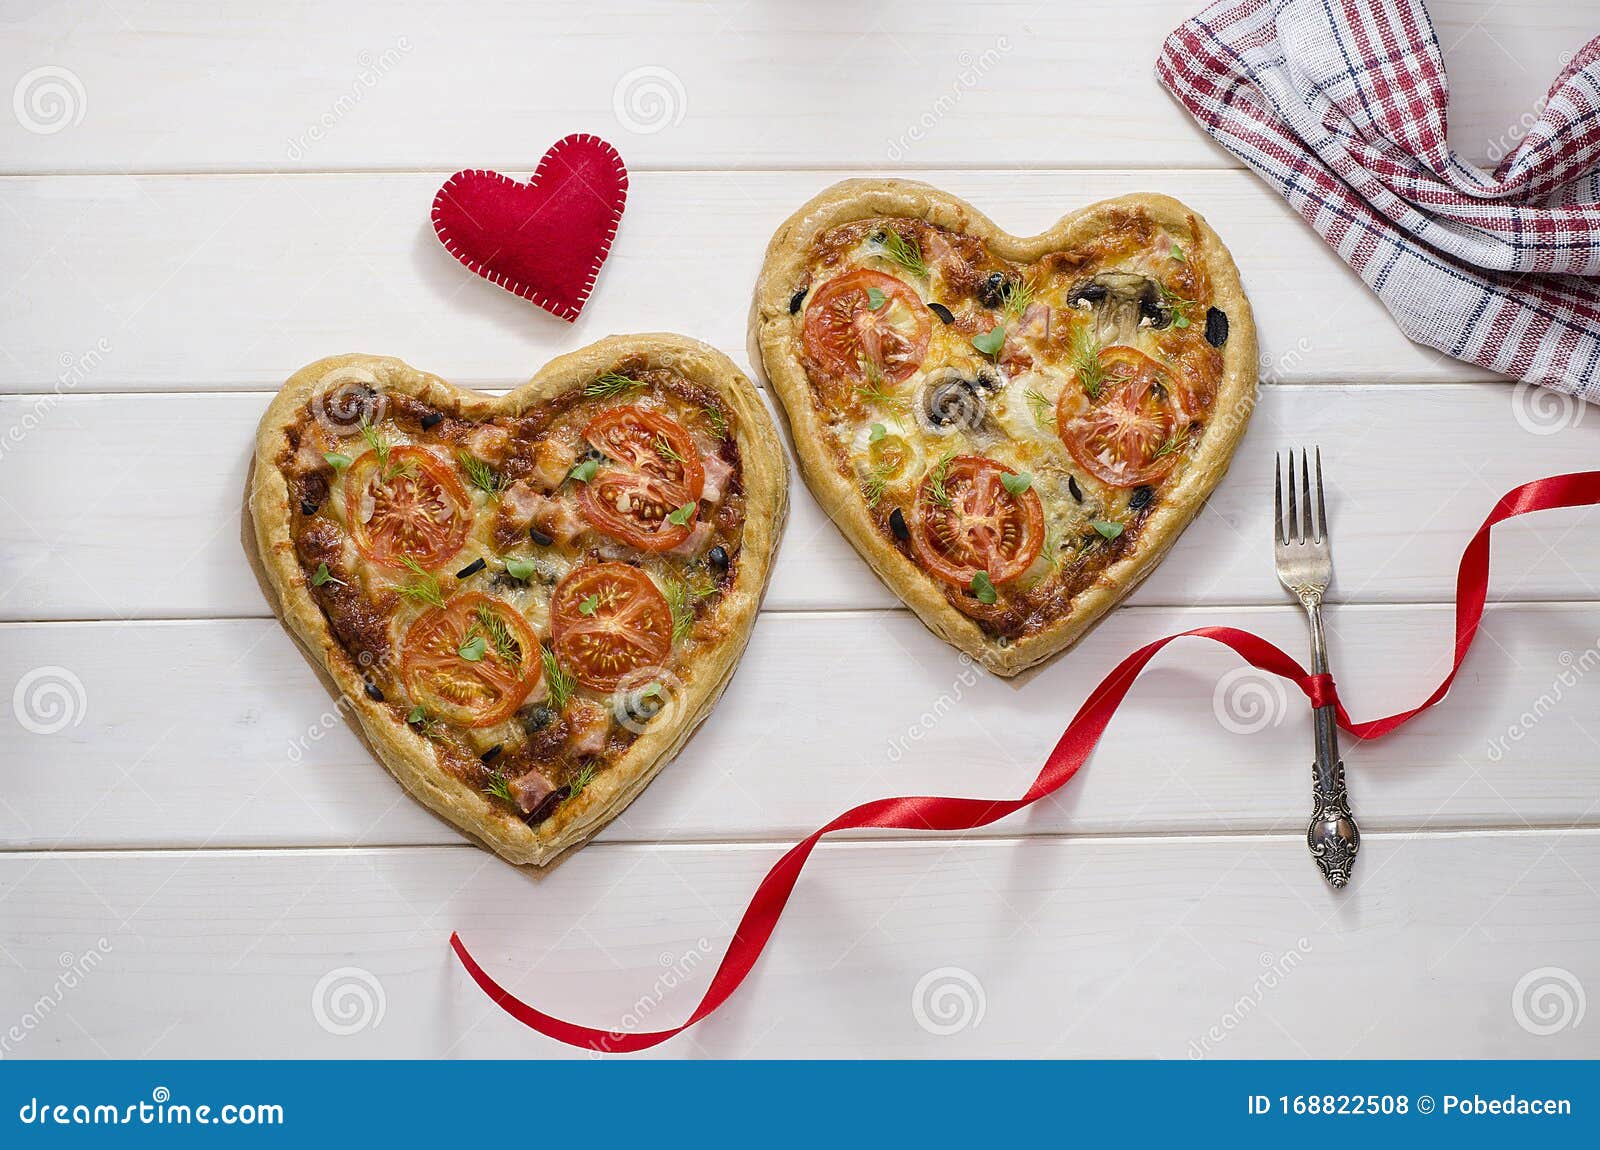 Two Pizza In The Form Of A Heart On A White Wooden Background With A ...